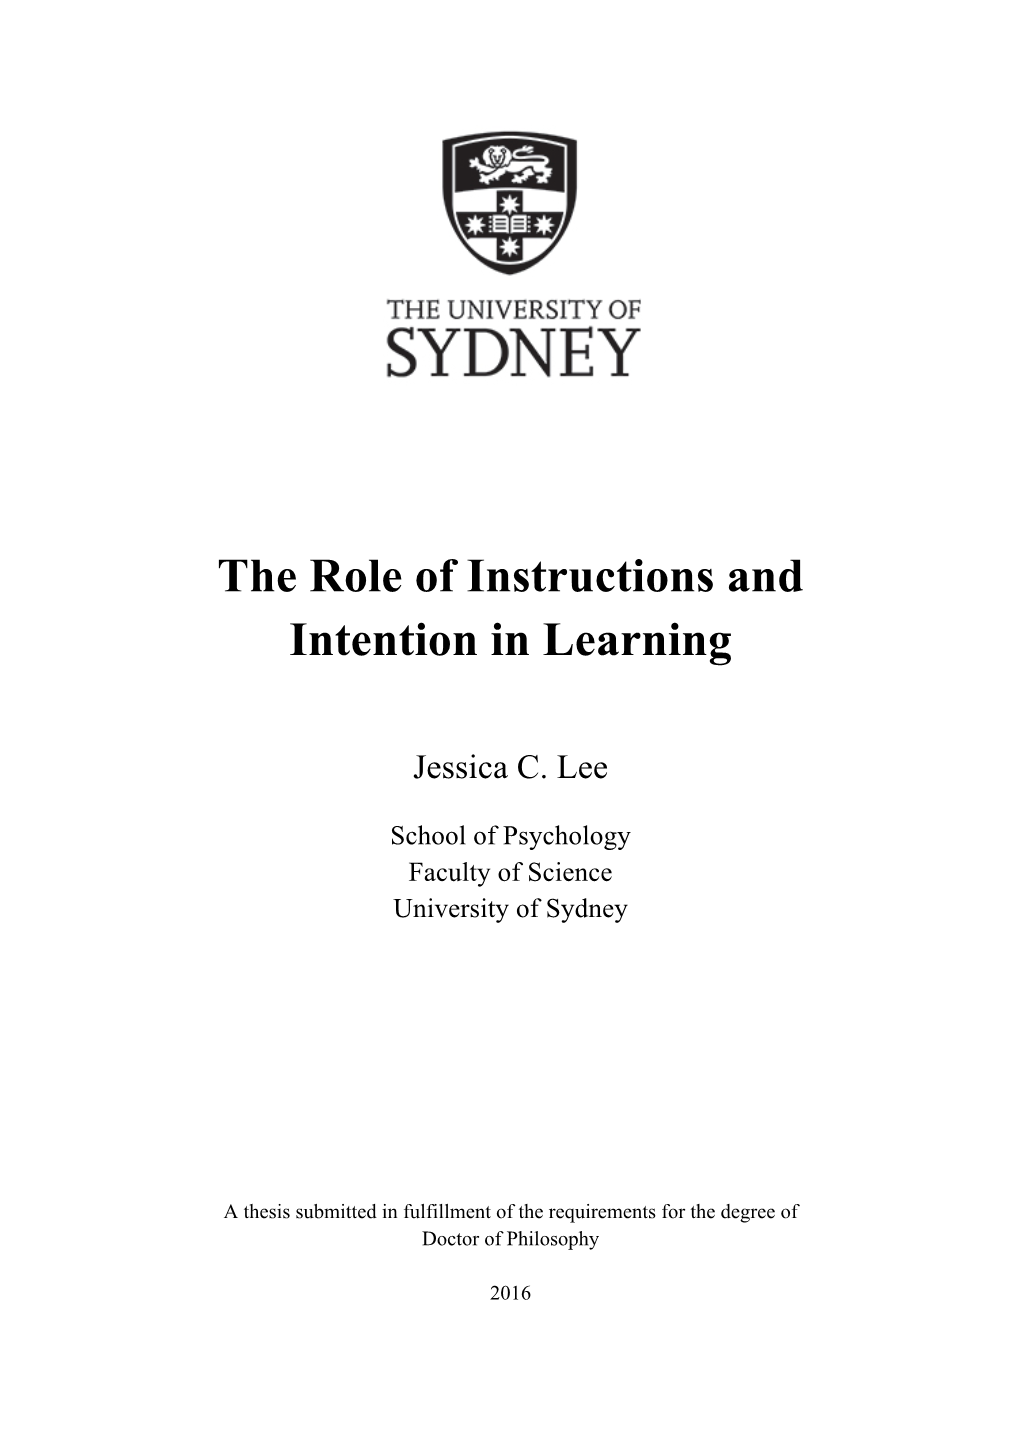 The Role of Instructions and Intention in Learning